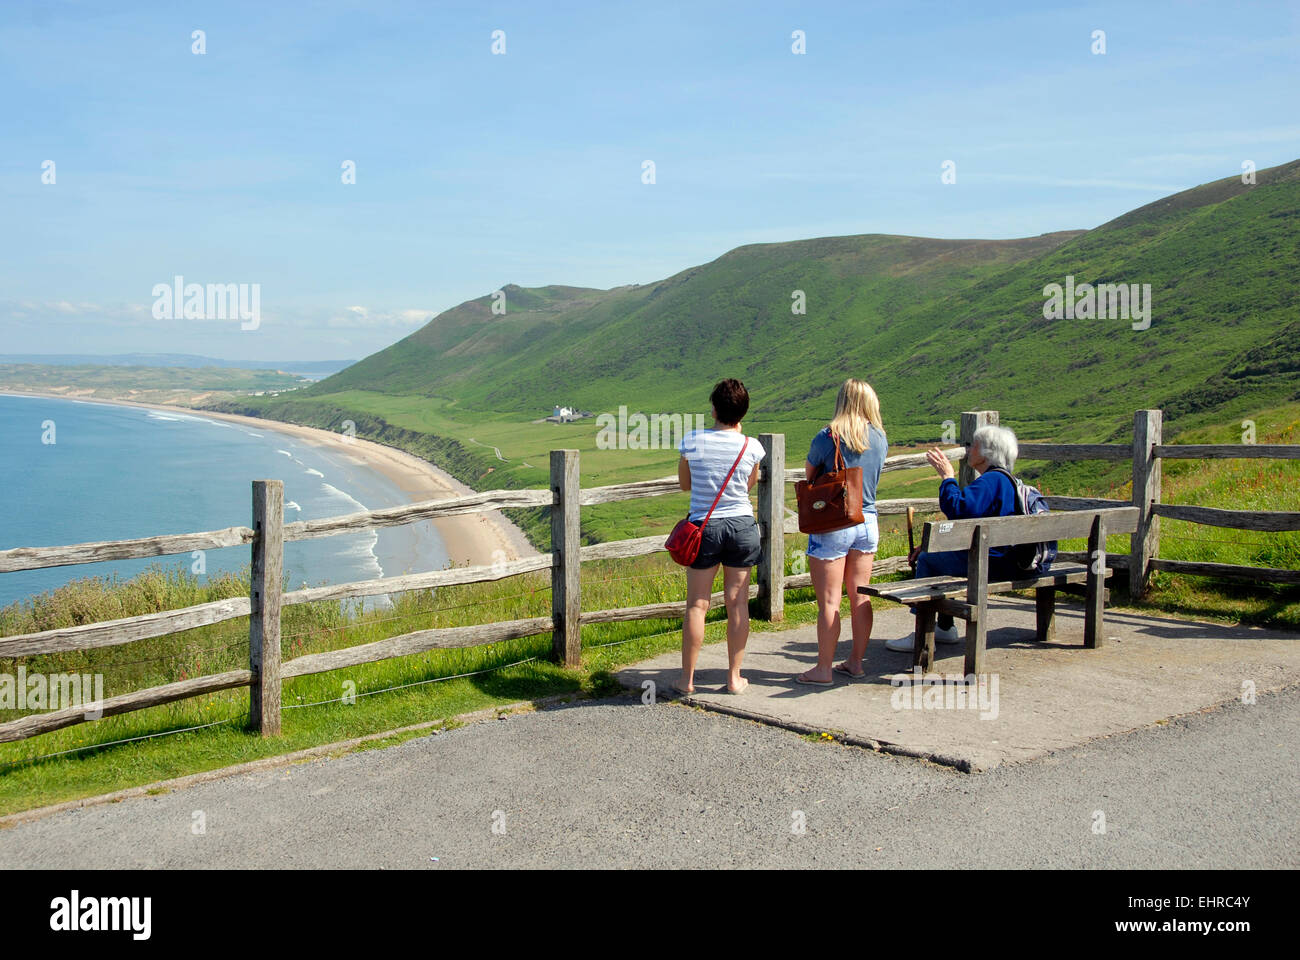 Group of people overlooking the beach and bay, Rhossili, Gower, South Wales Stock Photo